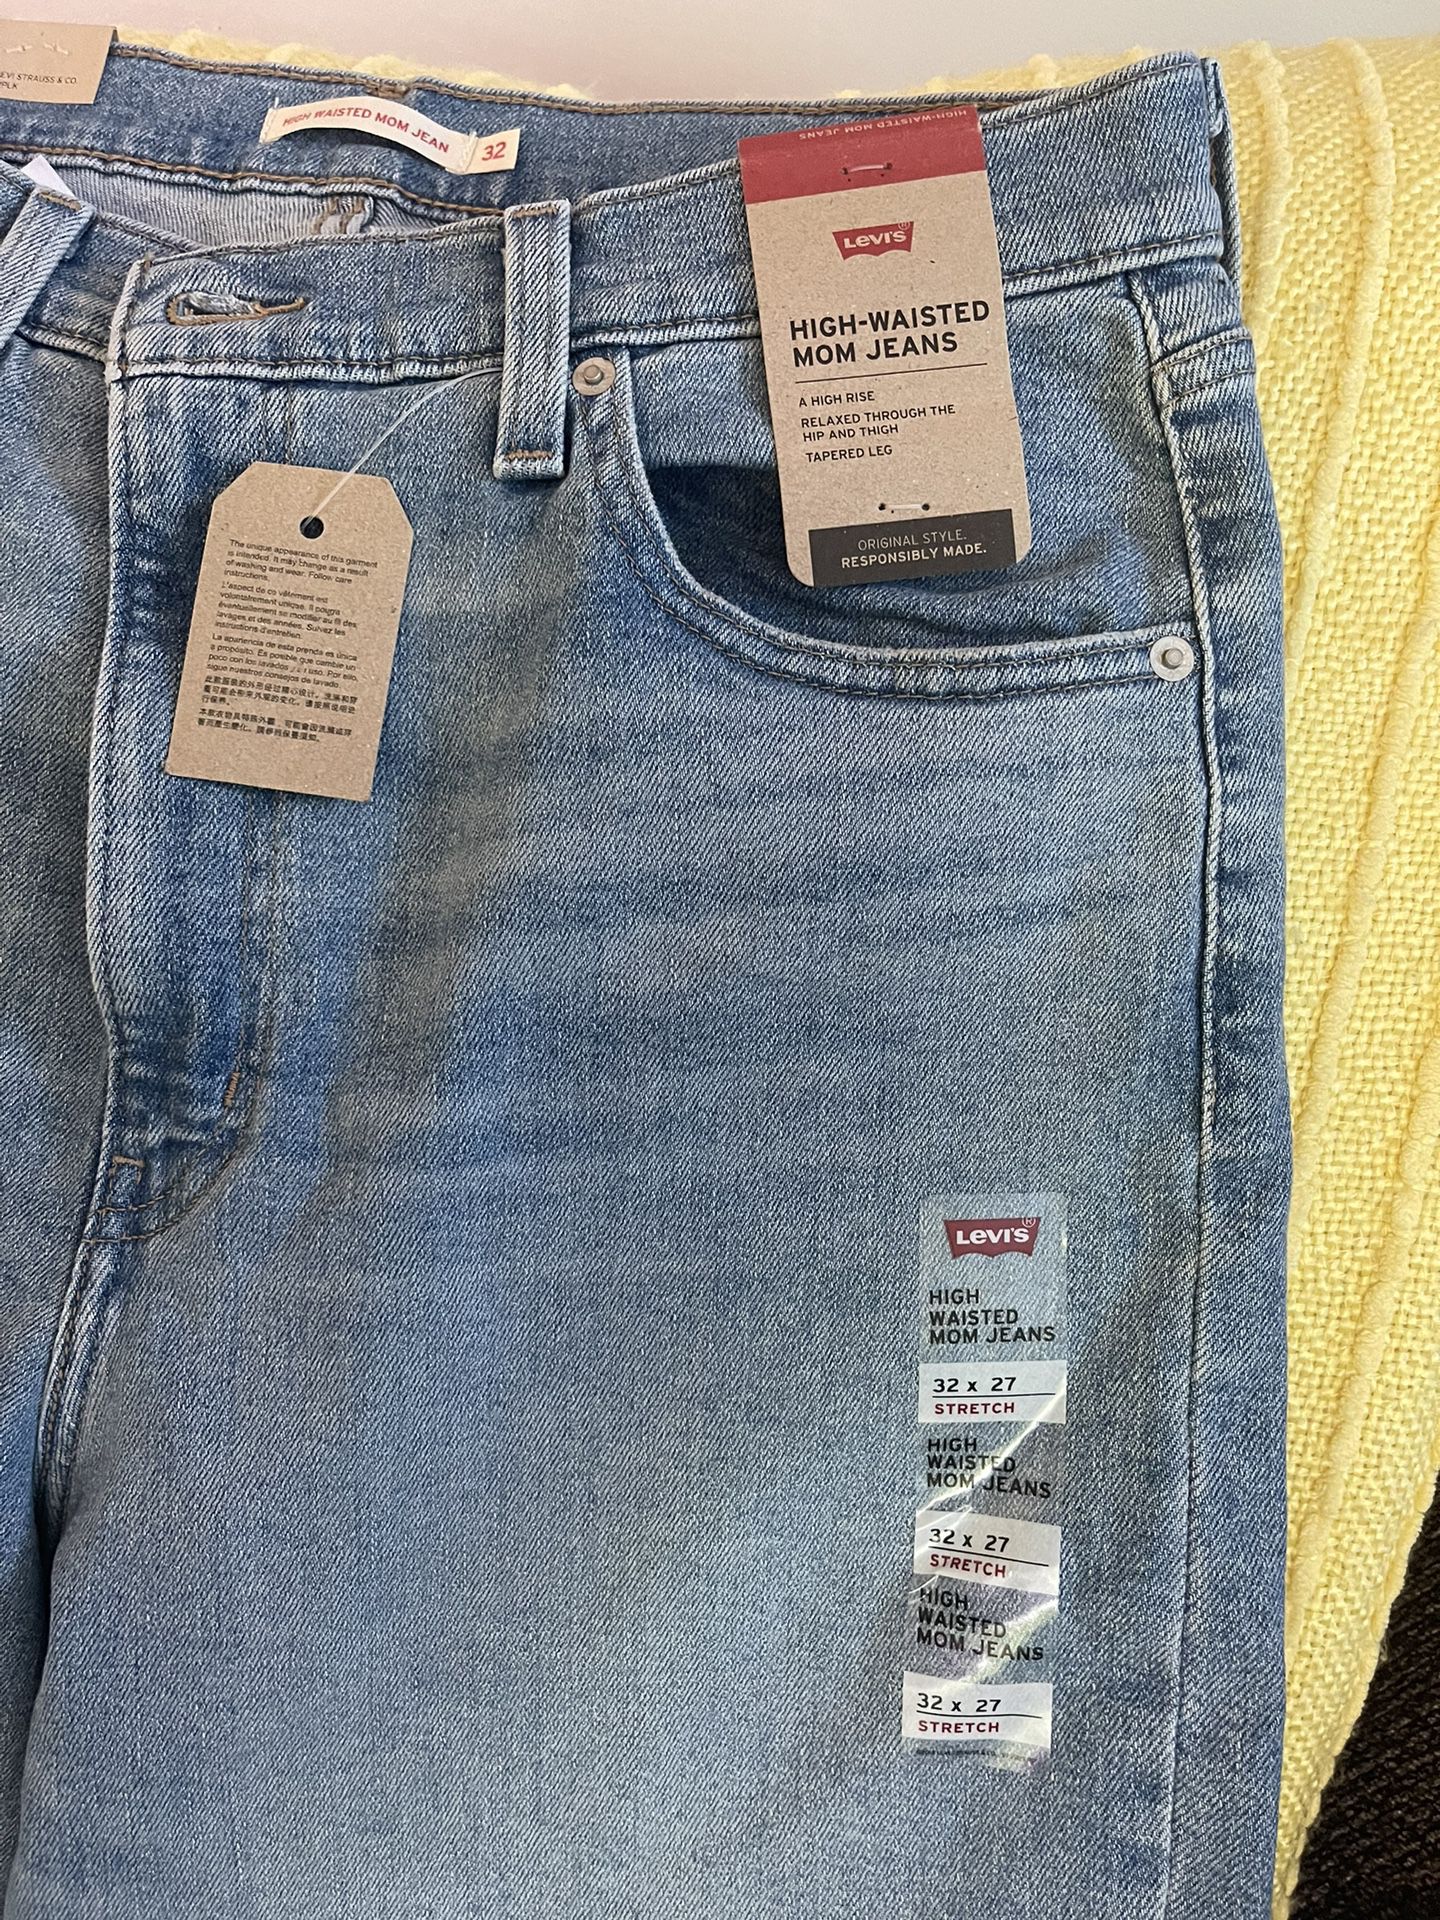 Jeans Levi’s High -waisted Mom Size 32x27 Stretch 